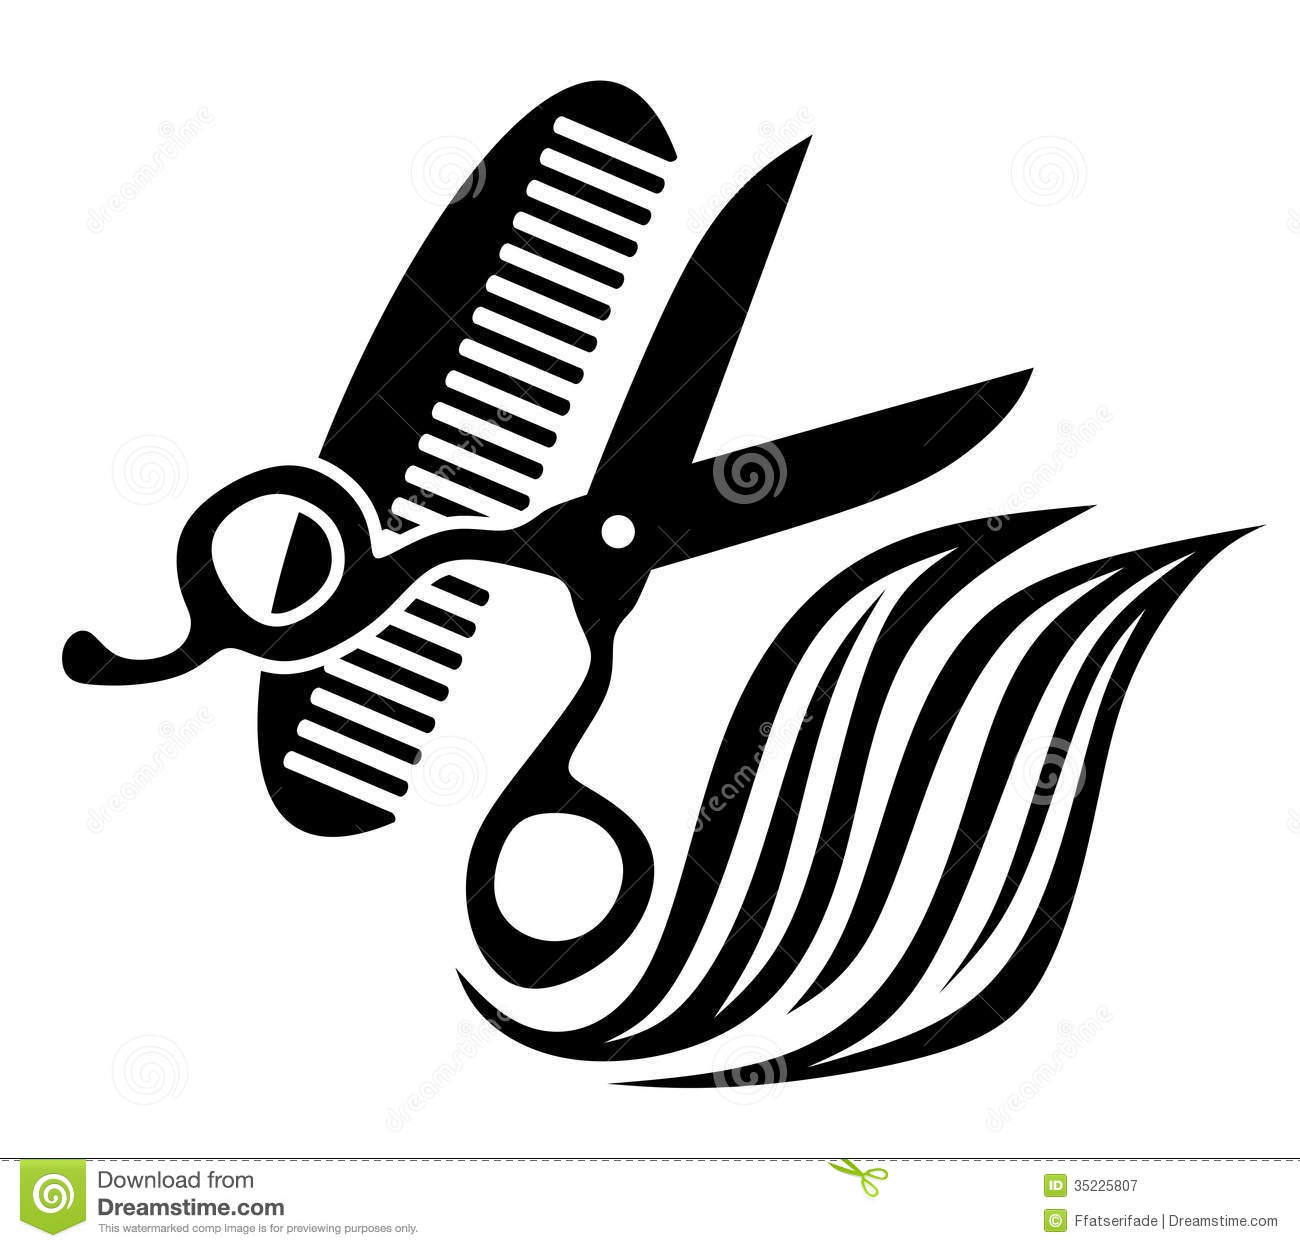 Abstract Illustration Of Equipment Used By Hairdressers